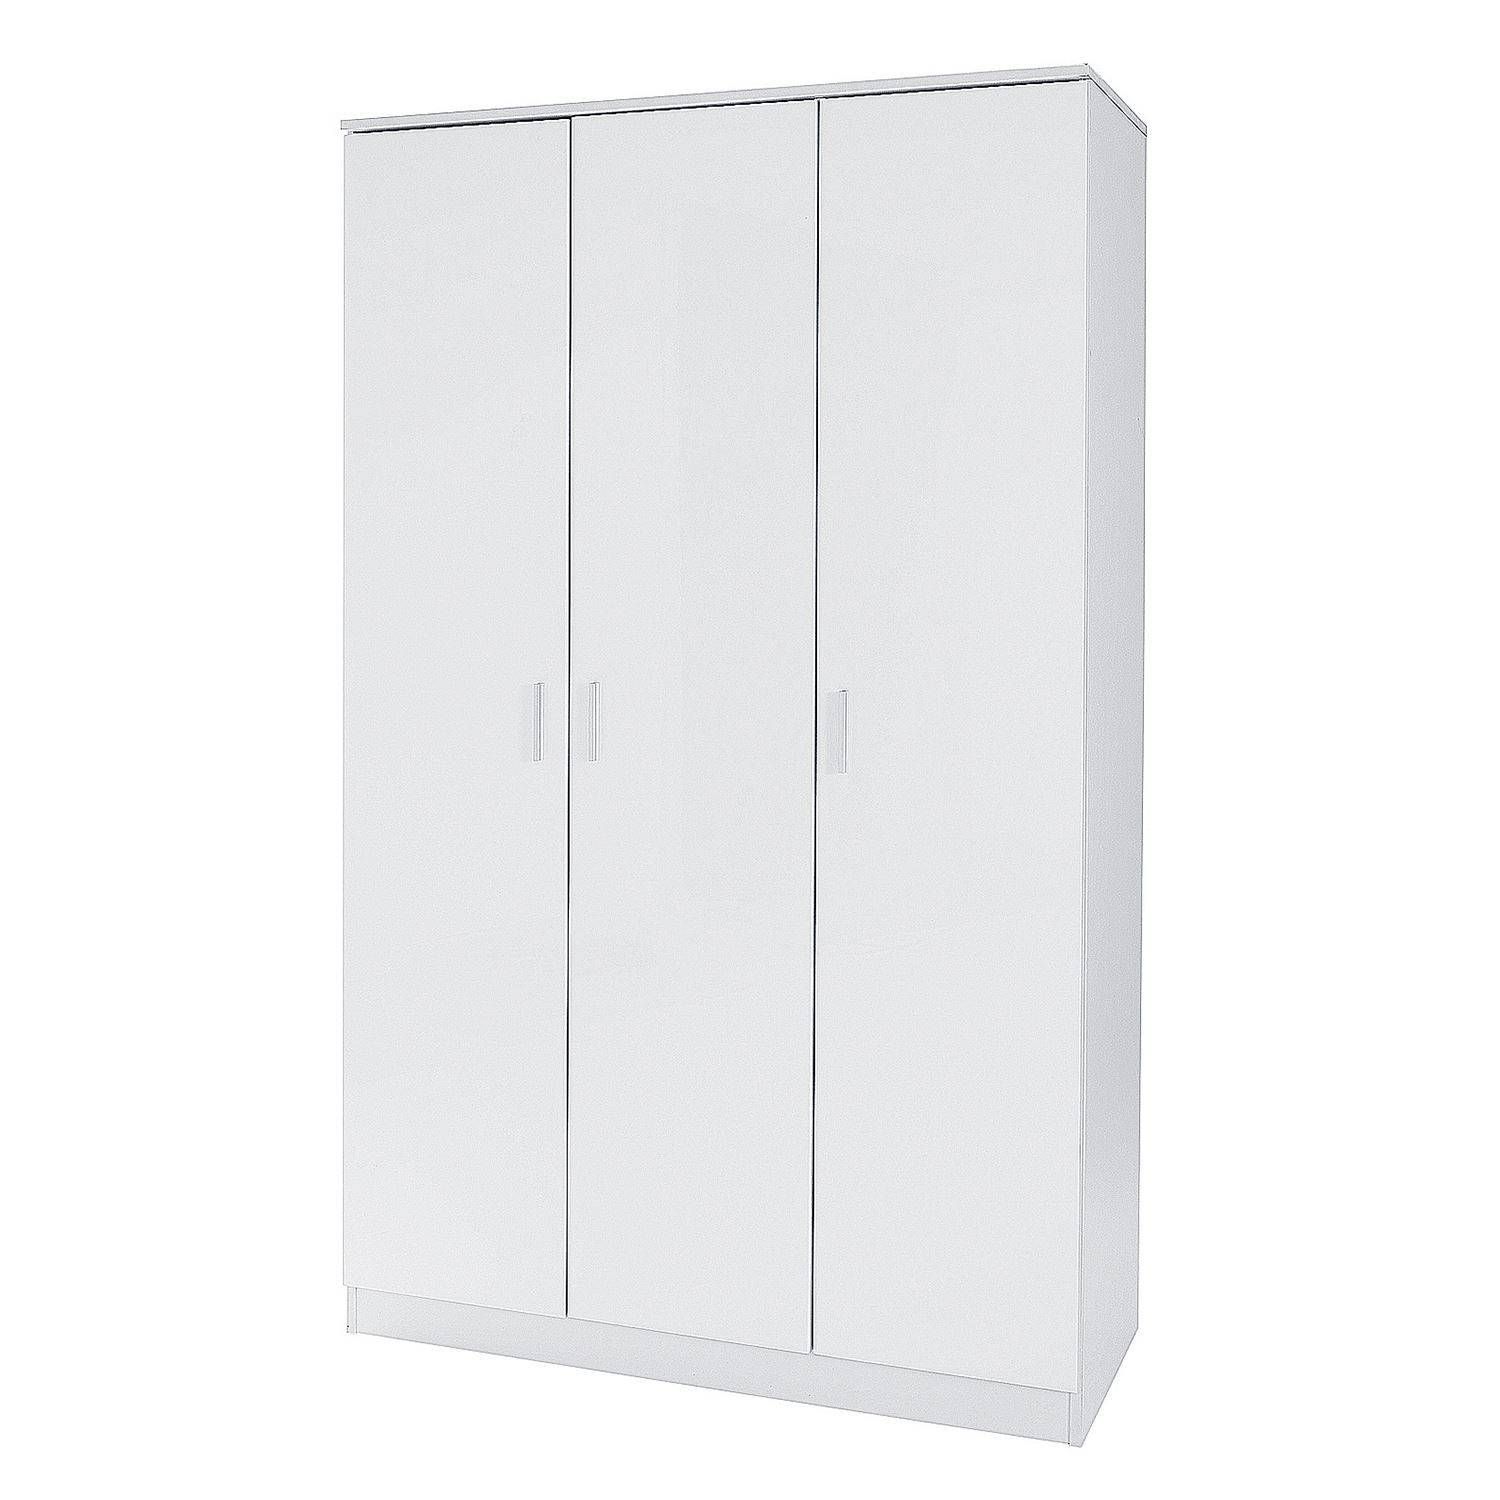 Bedroom Furniture 3 Piece Set White Gloss Bedside Drawer Chest With Regard To White Gloss Wardrobes (View 14 of 15)